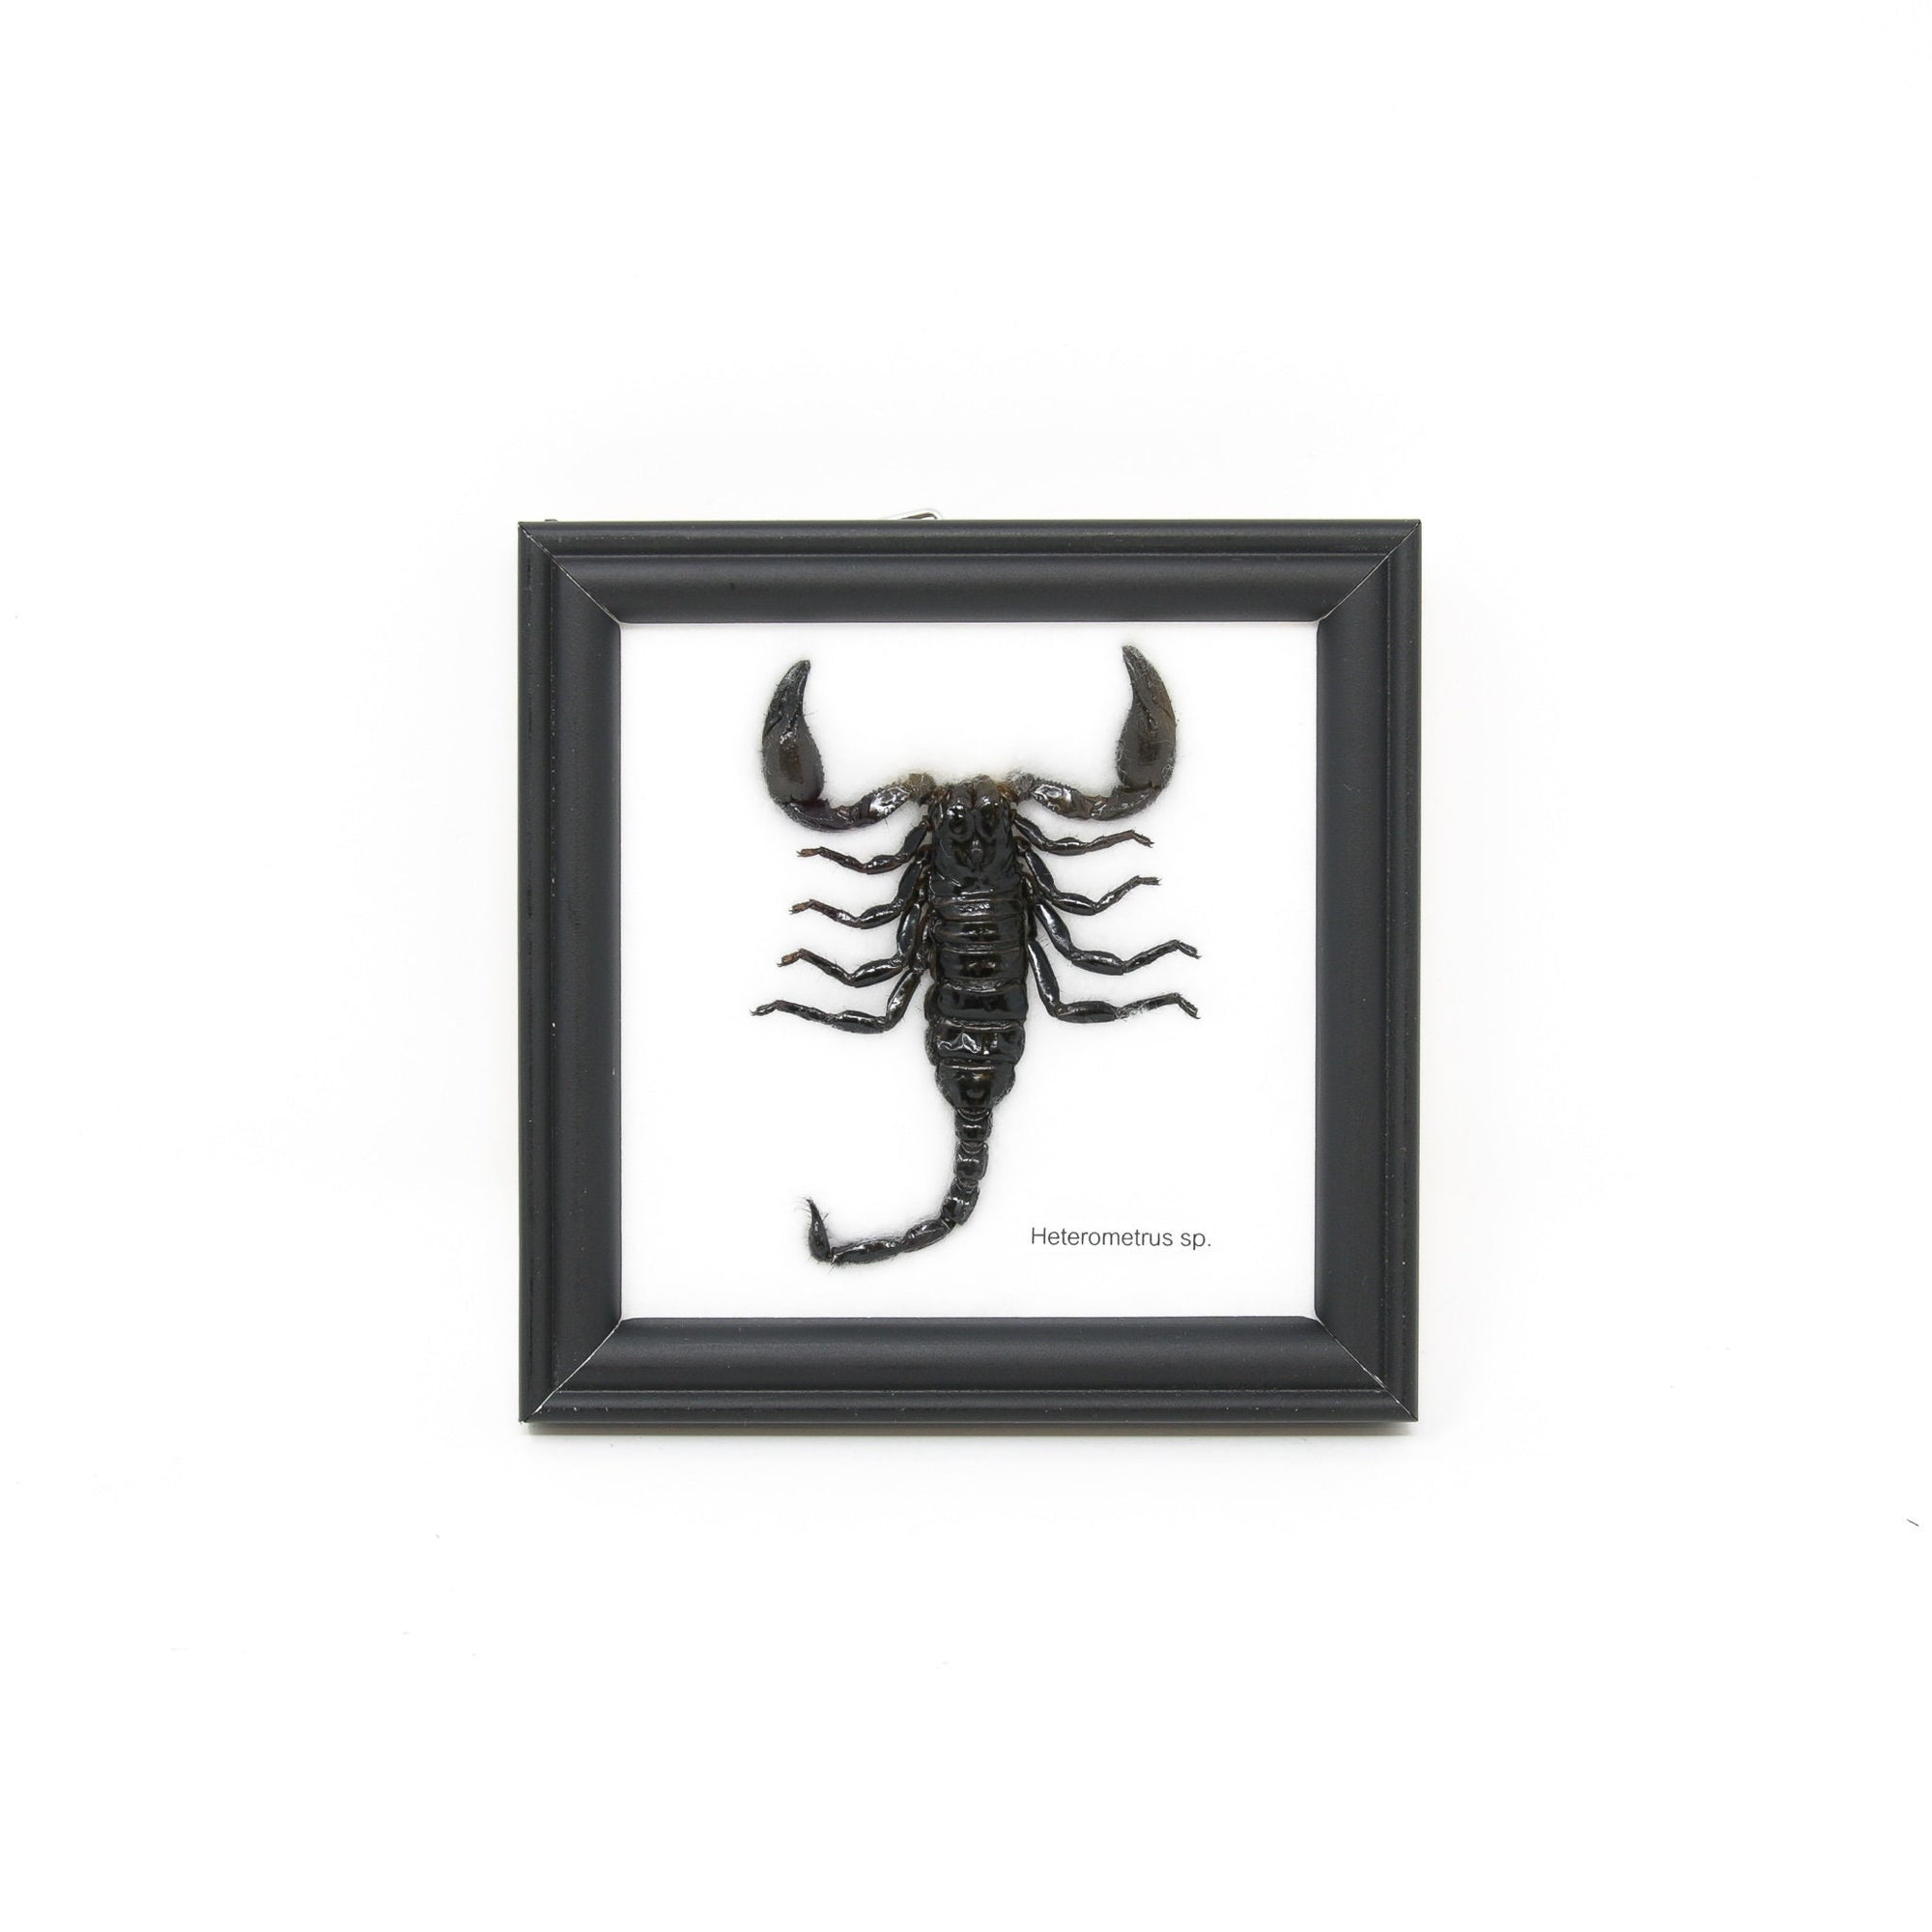 Thai Black Forest Scorpion FRAMED (Hetrometrus sp.) | Real Specimen Mounted Under Glass, Wall Hanging Home Décor Framed 5 x 5 In. Gift Boxed